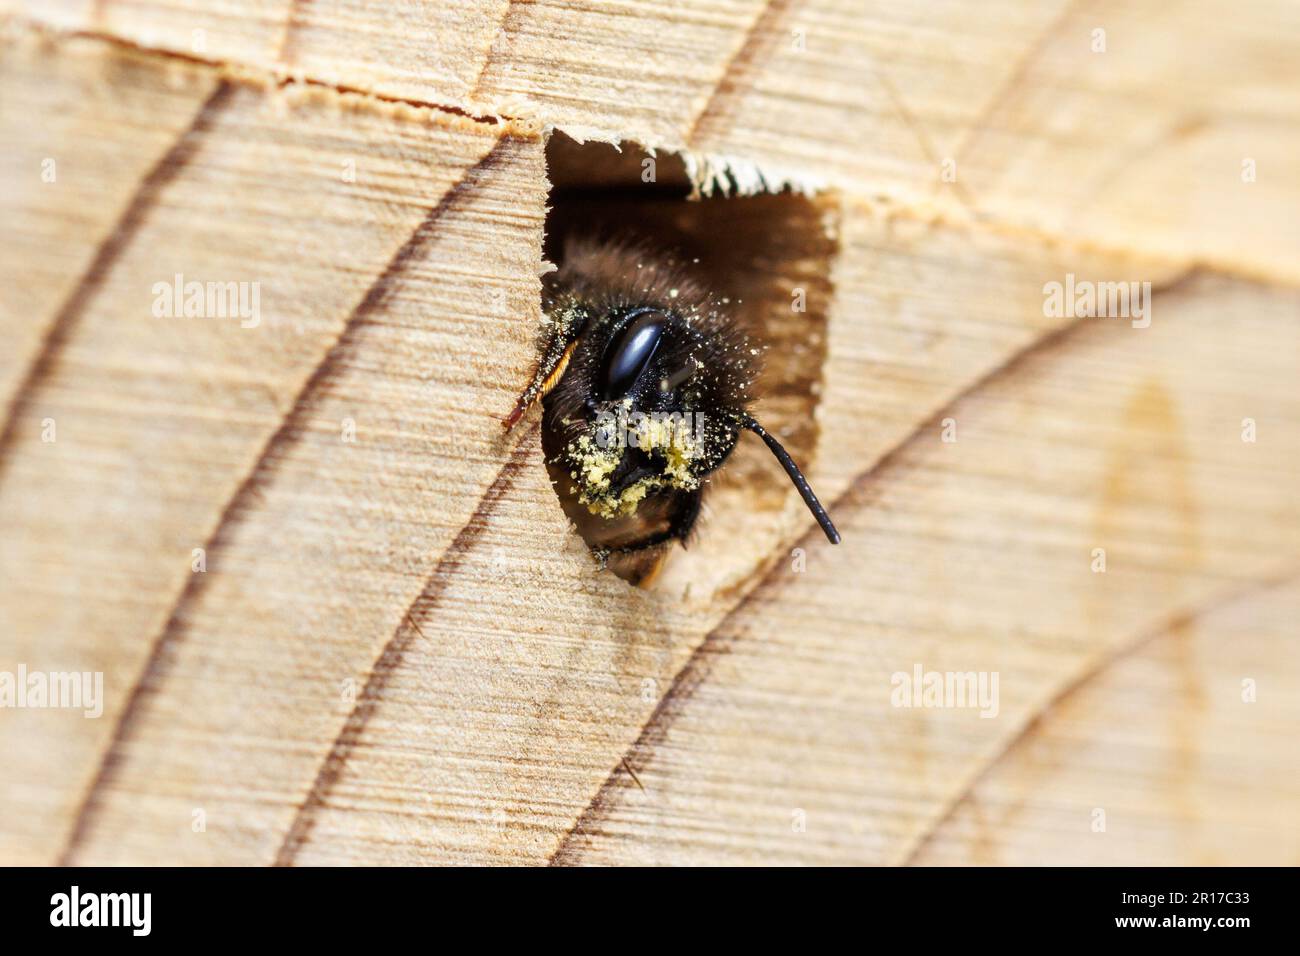 A Red Mason Bee,Osmia bicornis, in a bee house, the houses allow solitary bees a place to lay larvae which they then cover up with mud. Sussex,UK Stock Photo